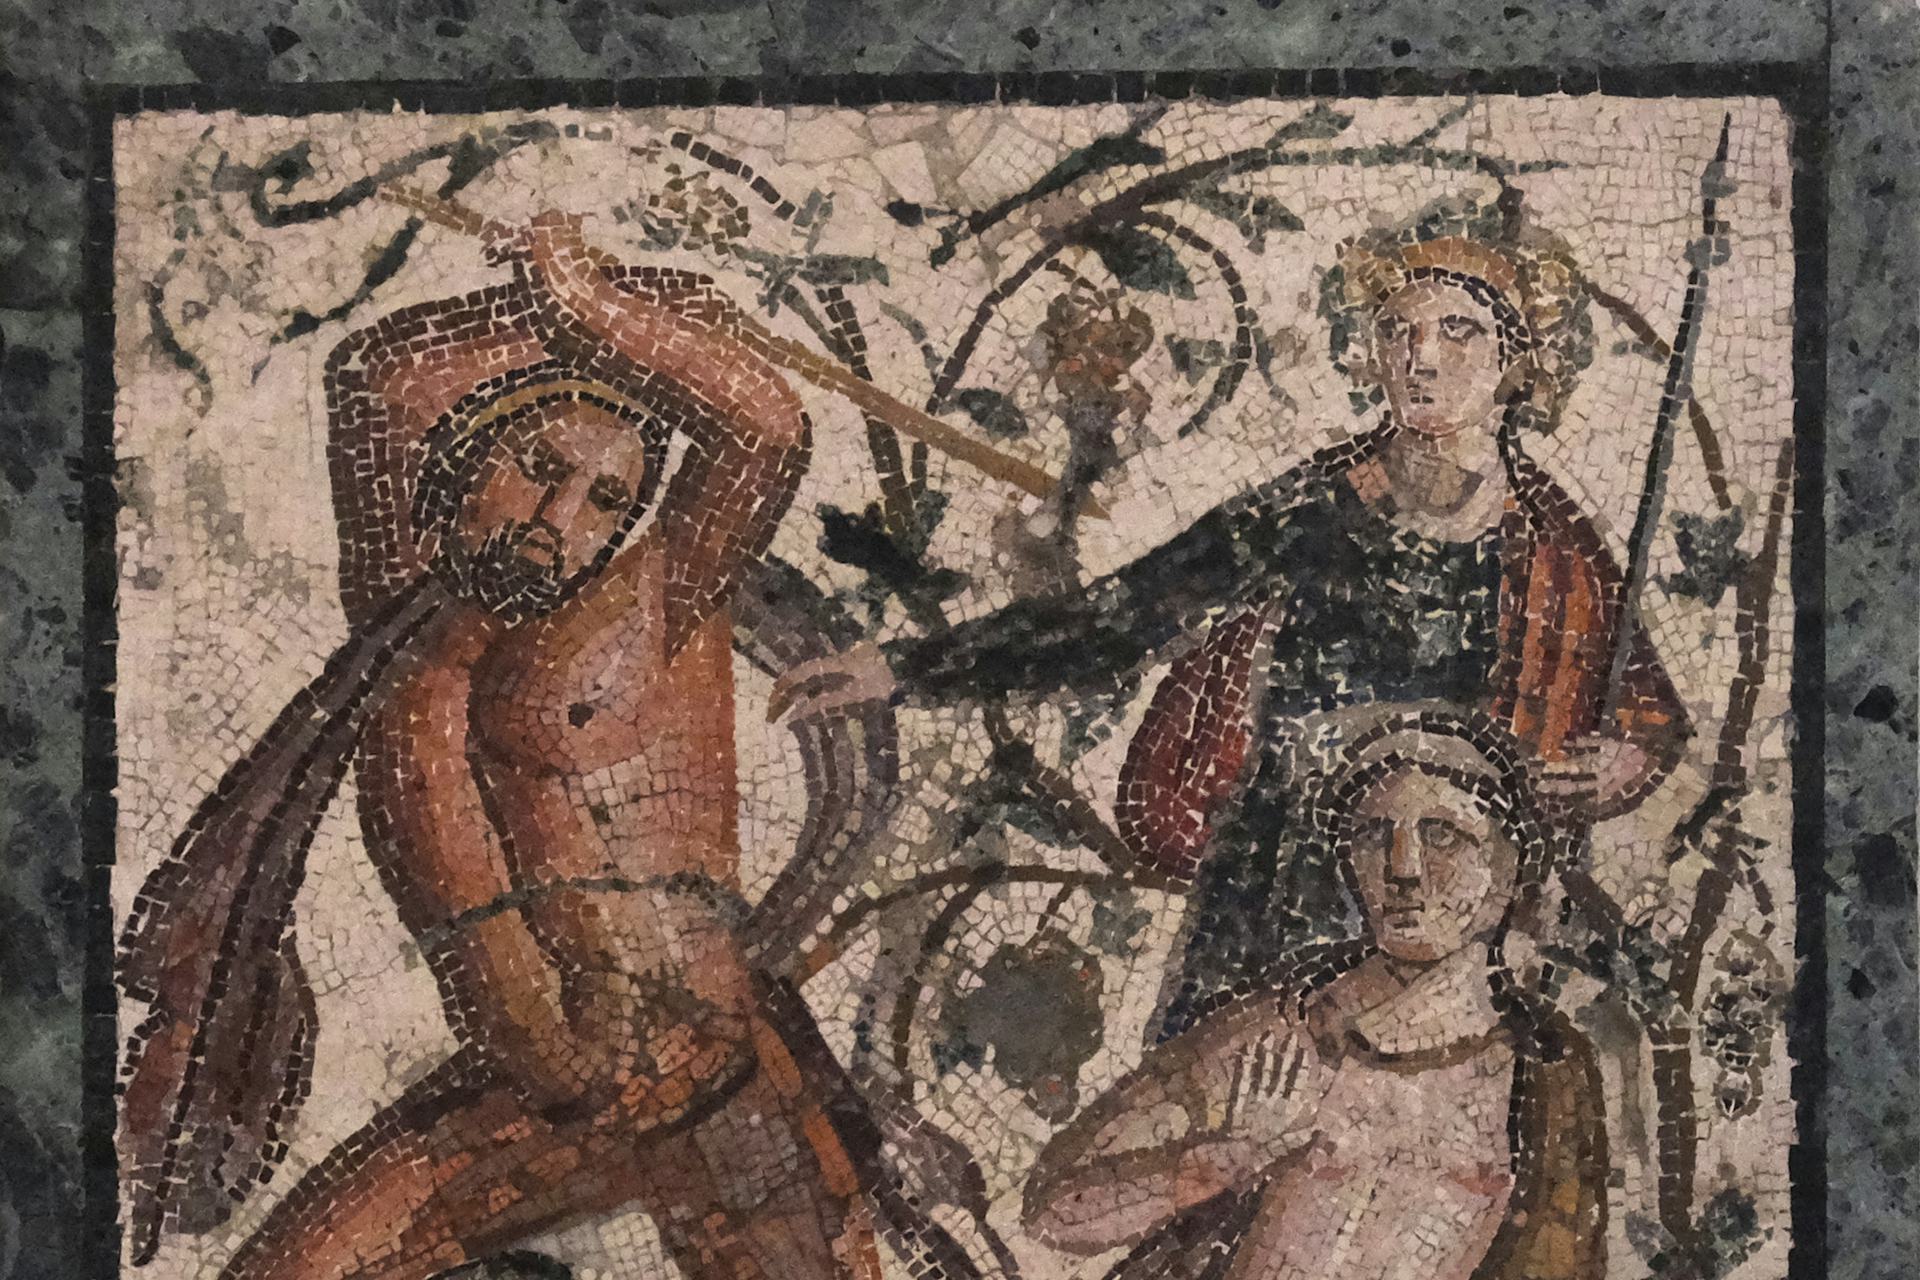 Mosaic of Lycurgus fighting Ambrosia and Dionysus